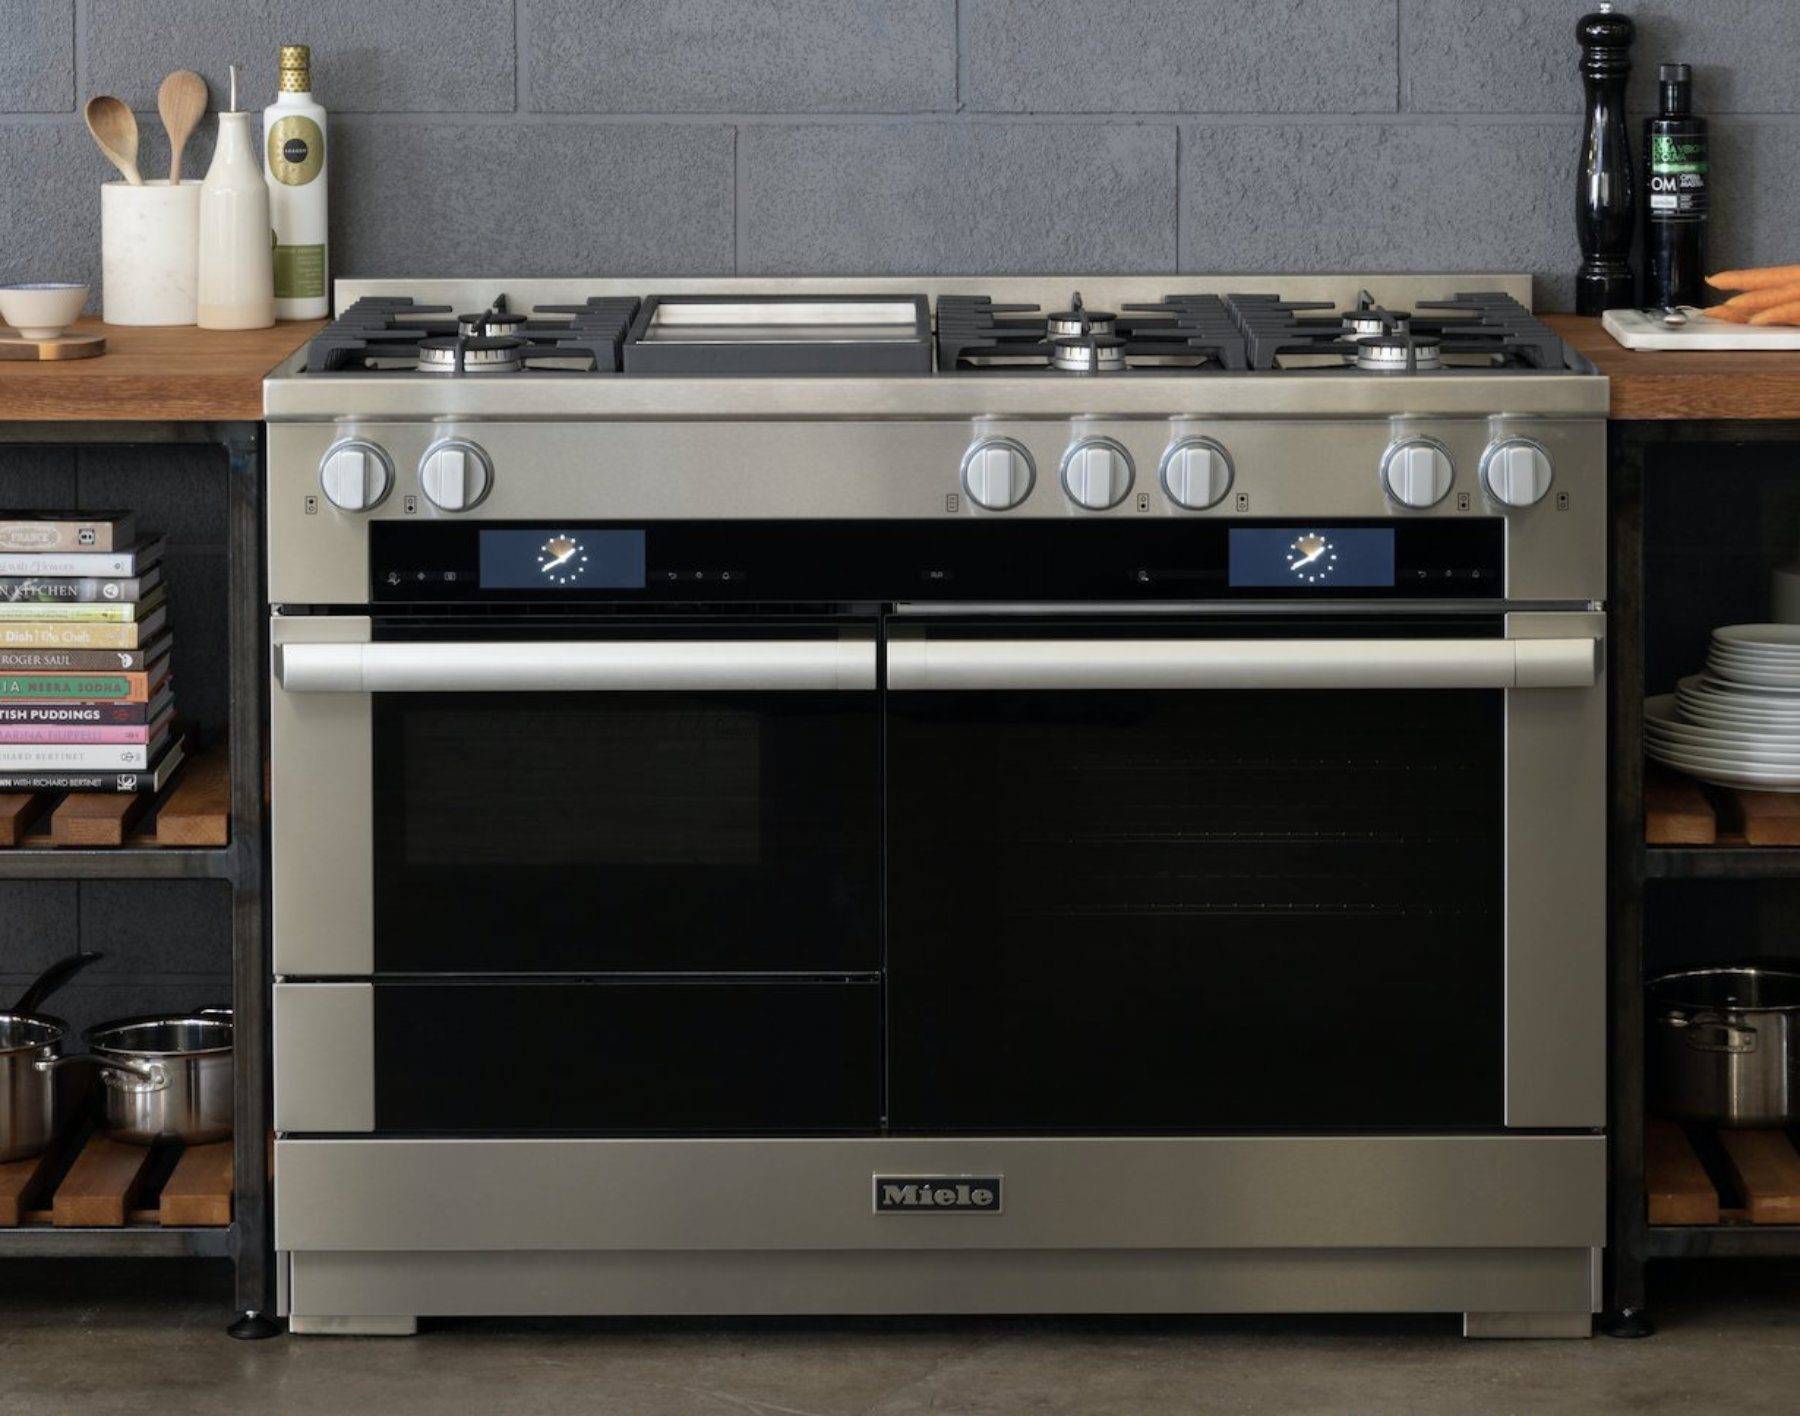 3 Text Miele Range Ovens In Stafford And Cheshire Www.staffordshirekitchens.com | Totally Kitchens, Southampton